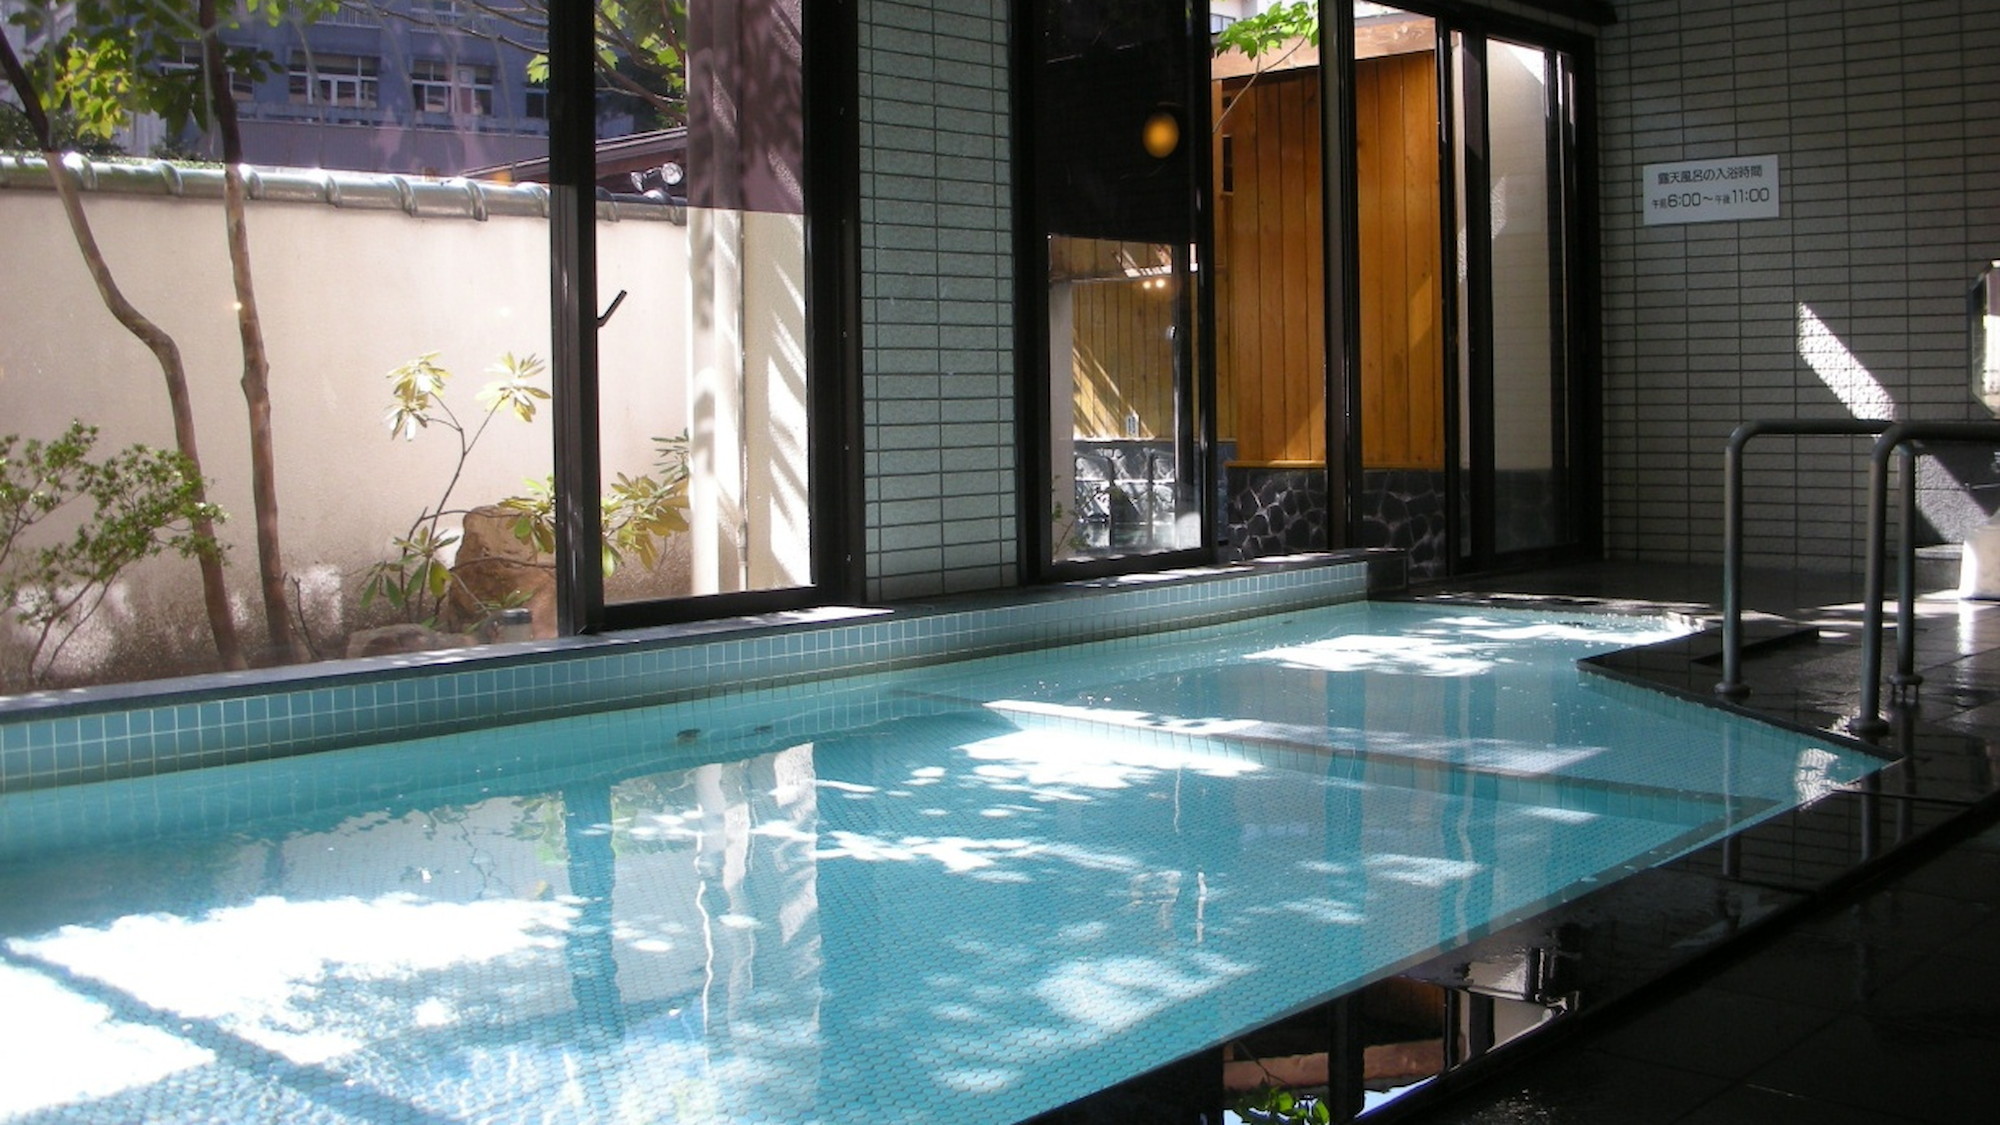 Hotel Tenryukaku Hotel Tenryukaku is a popular choice amongst travelers in Fukushima, whether exploring or just passing through. The property offers a high standard of service and amenities to suit the individual need